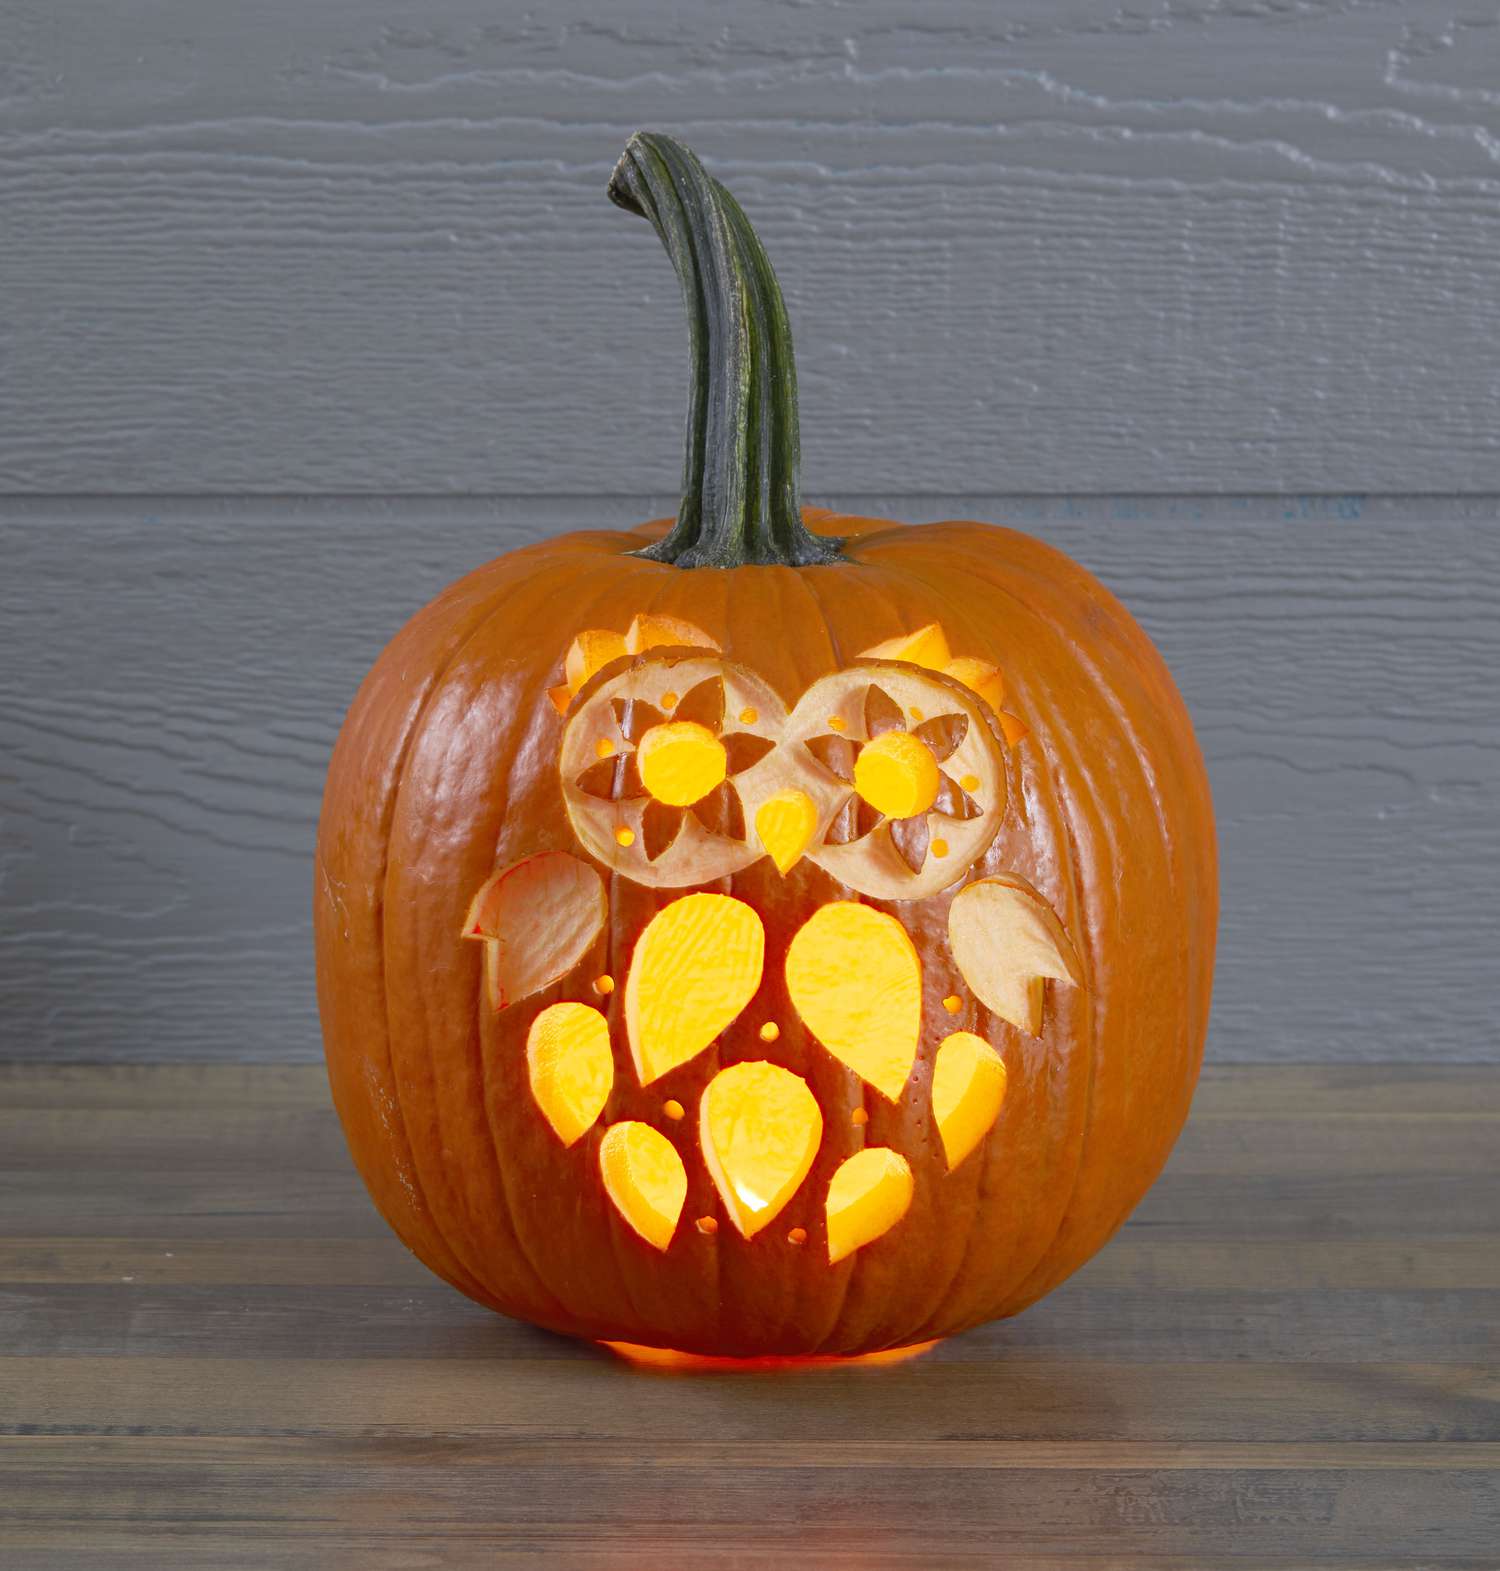 Owl Pumpkin Carving Owl Pumpkin Carving Pumpkin Carving Halloween | My ...